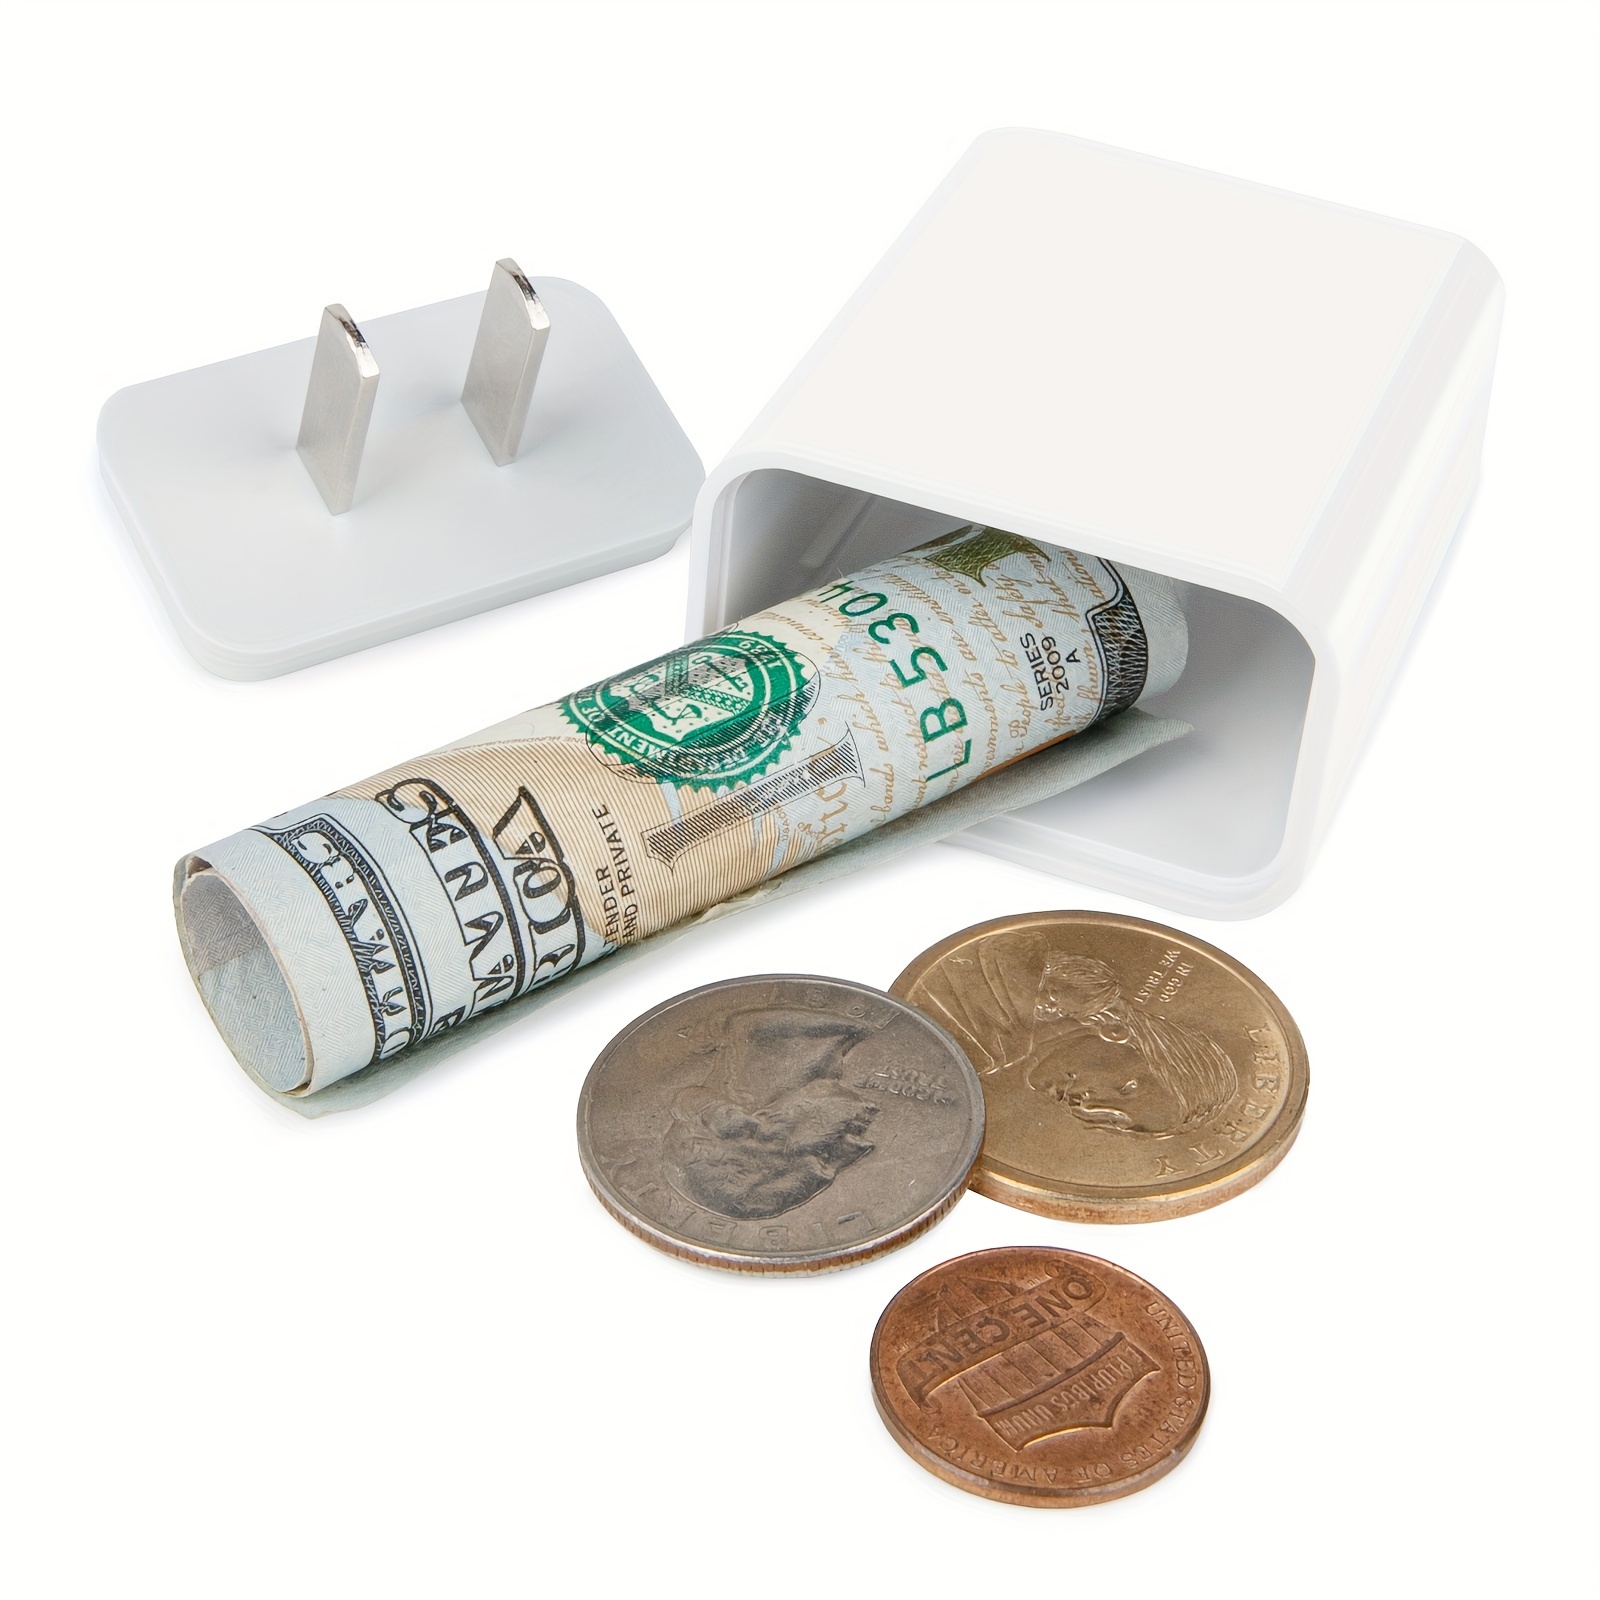 

Fake Charger Diversion Safe-looks Like A Real Charger-hollow Iiterior Hidden Money Coins Or Other Small Valuables